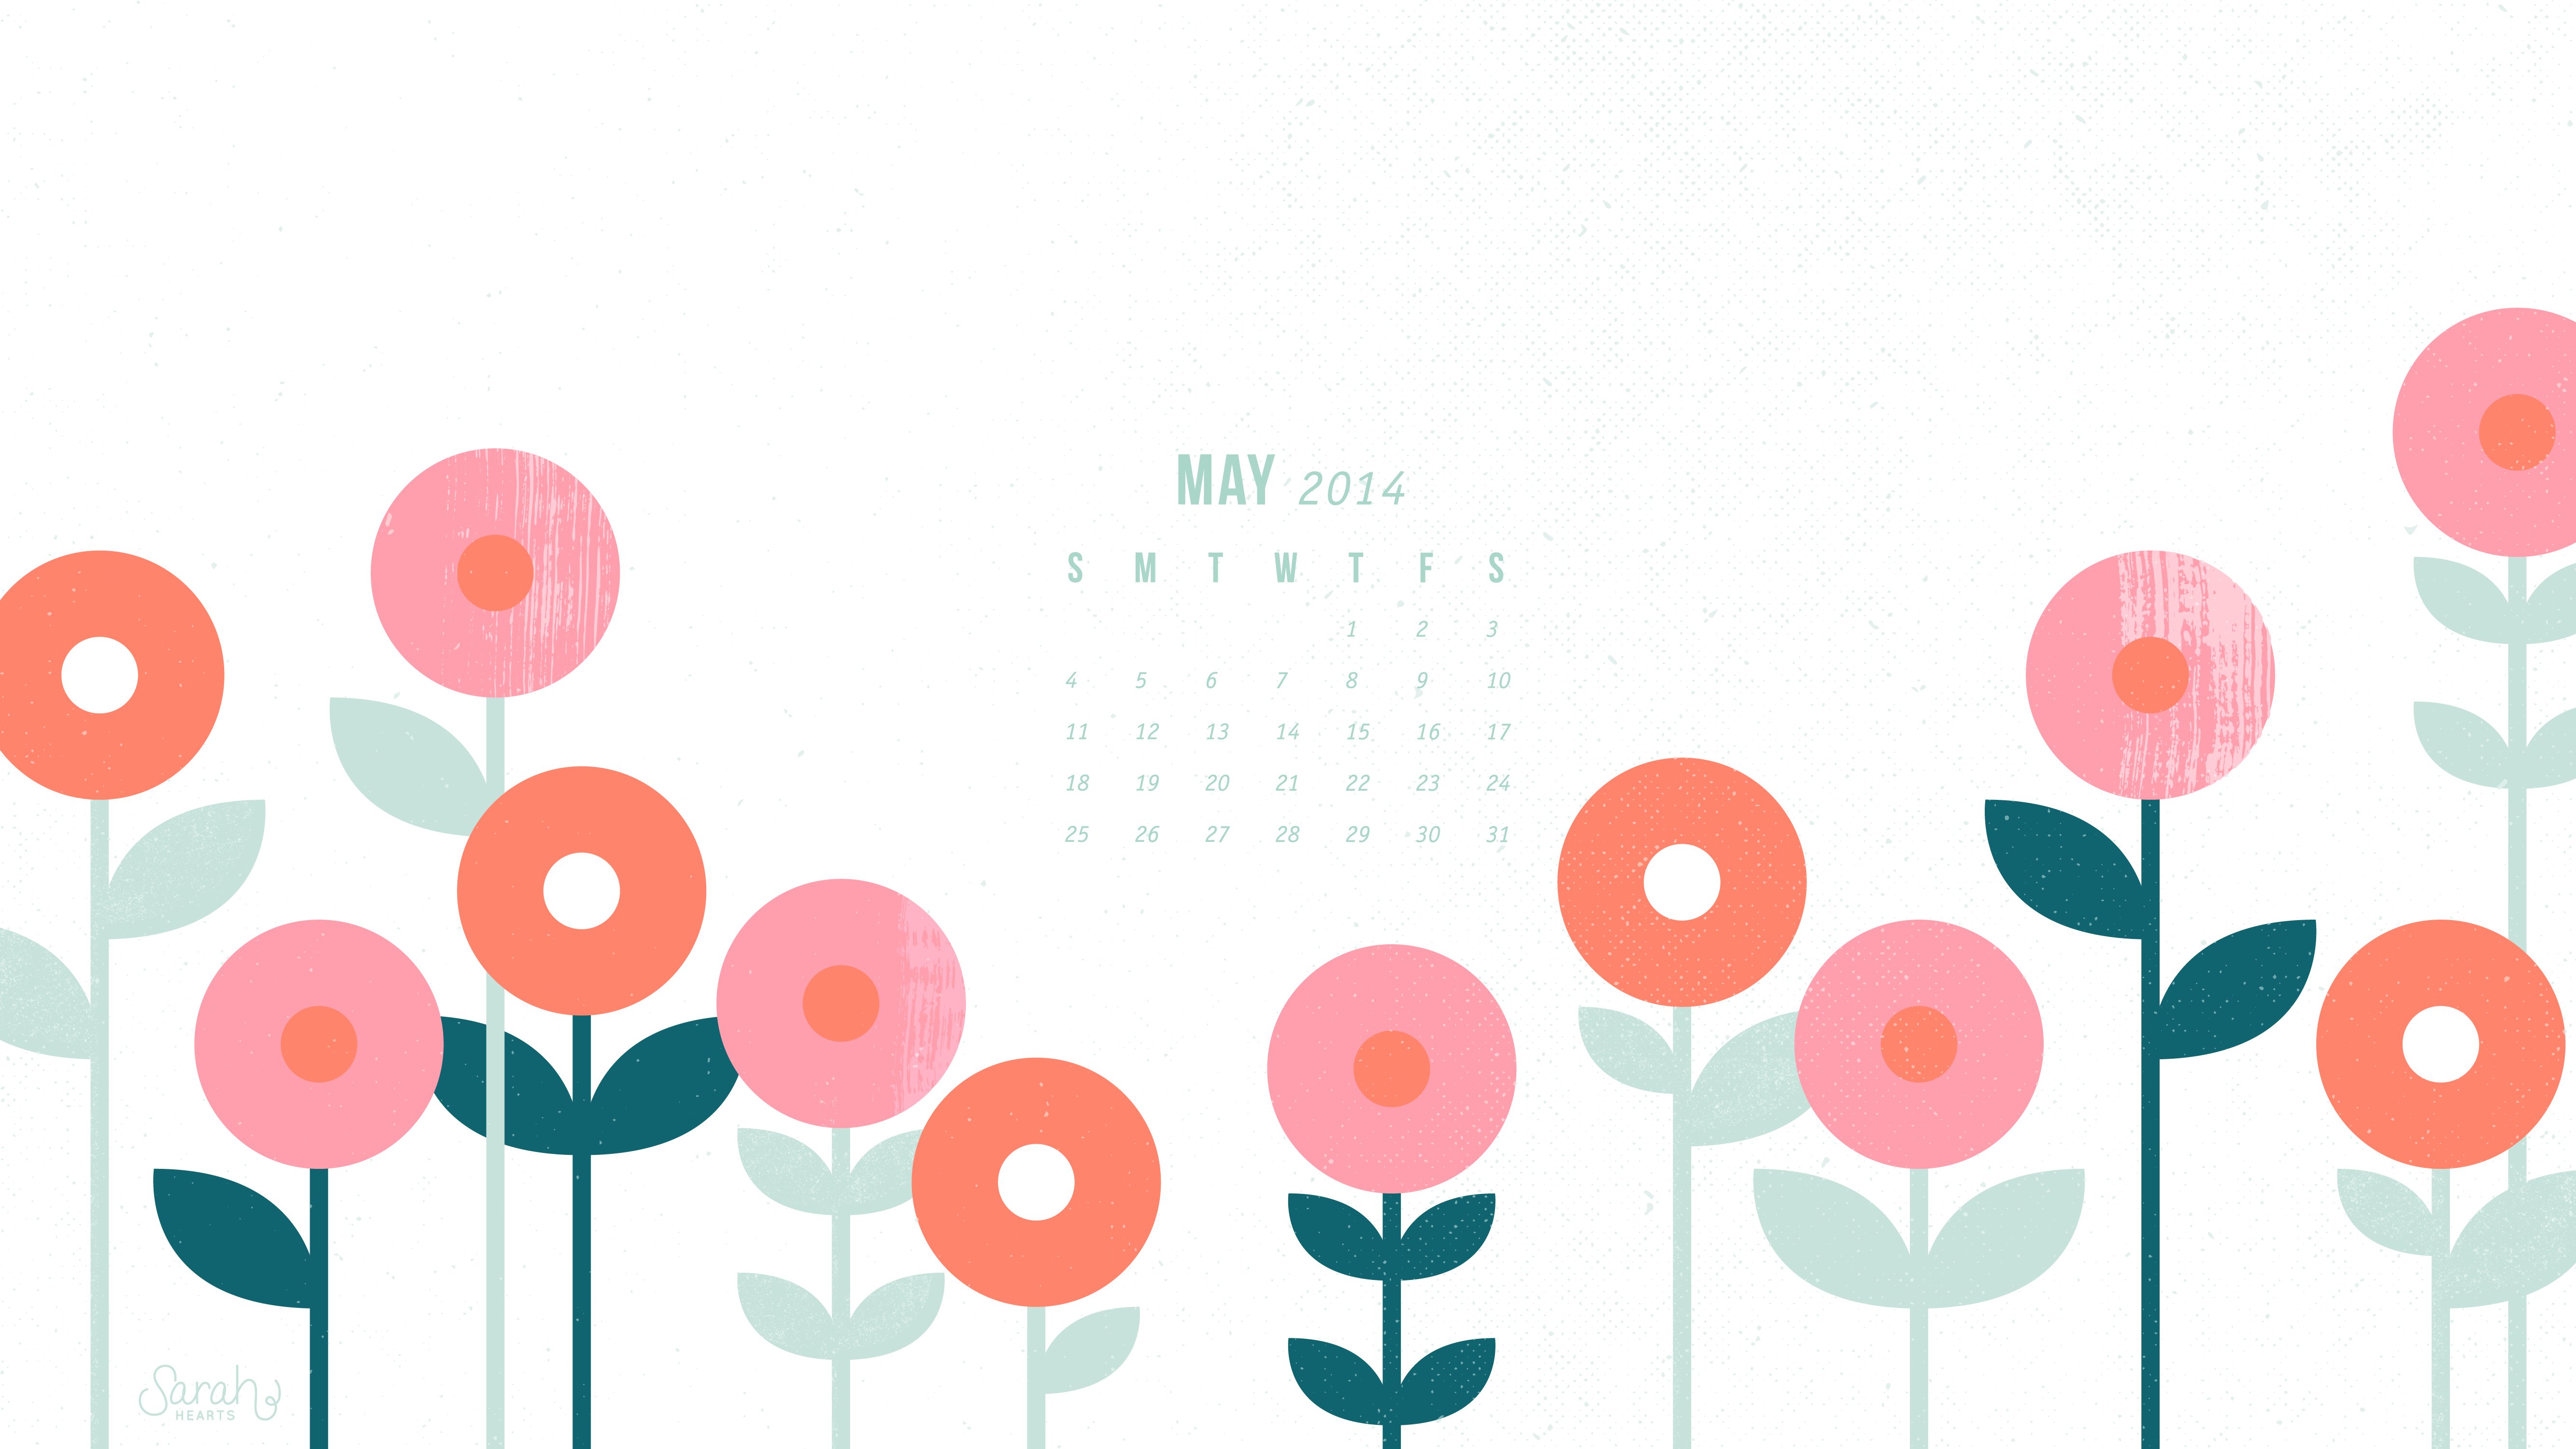 2560 x 1440 2560 x 1440 with calendar 2560 x 1440 with quote